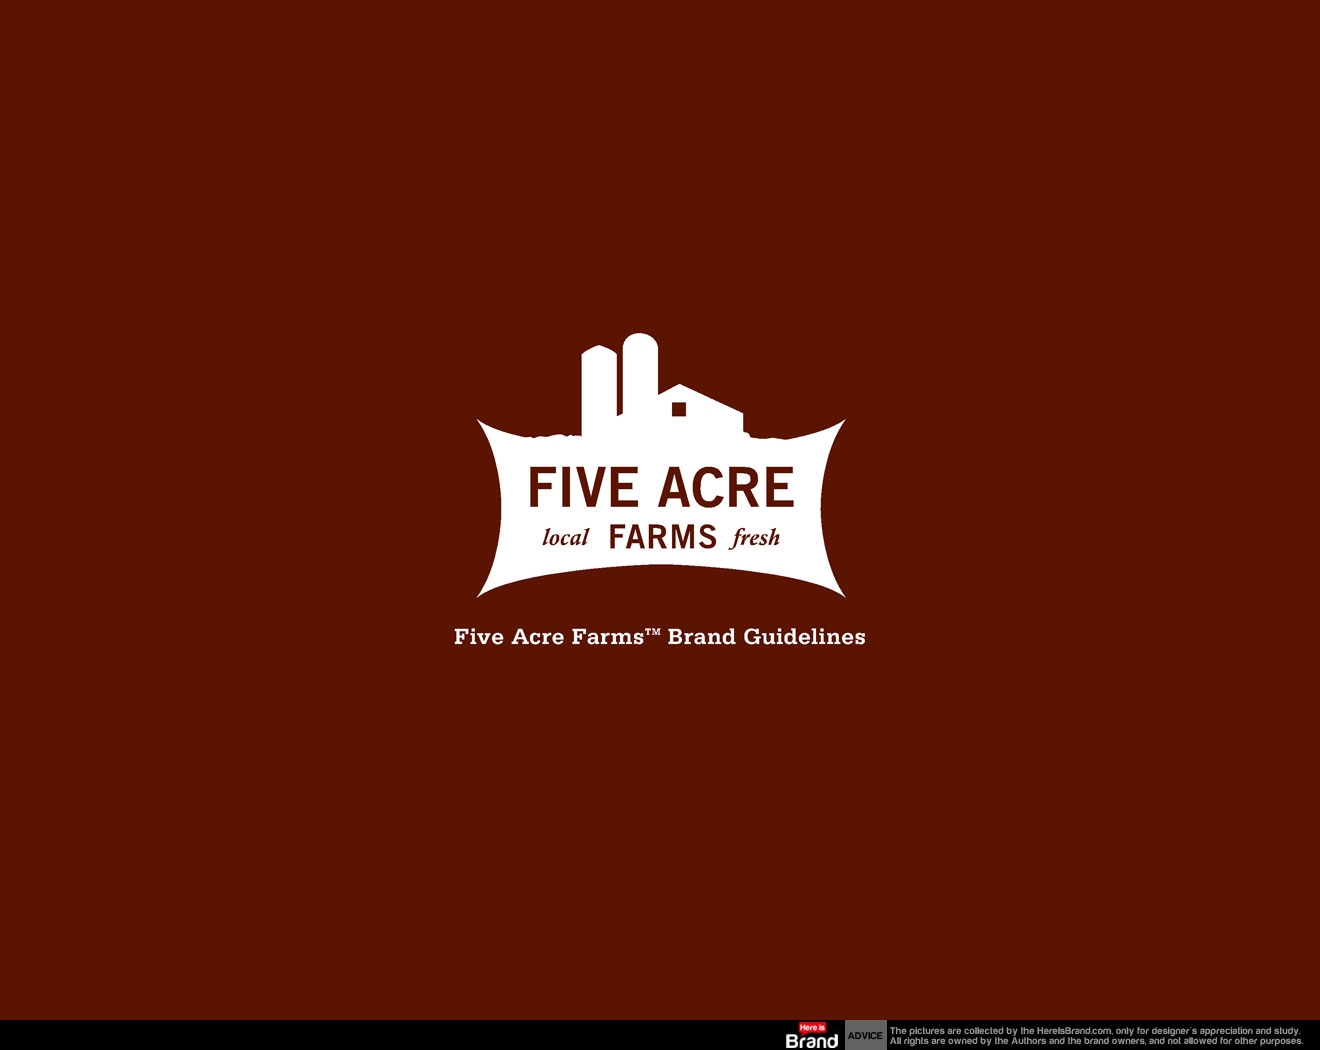 Five Acre Farms brand guidelines